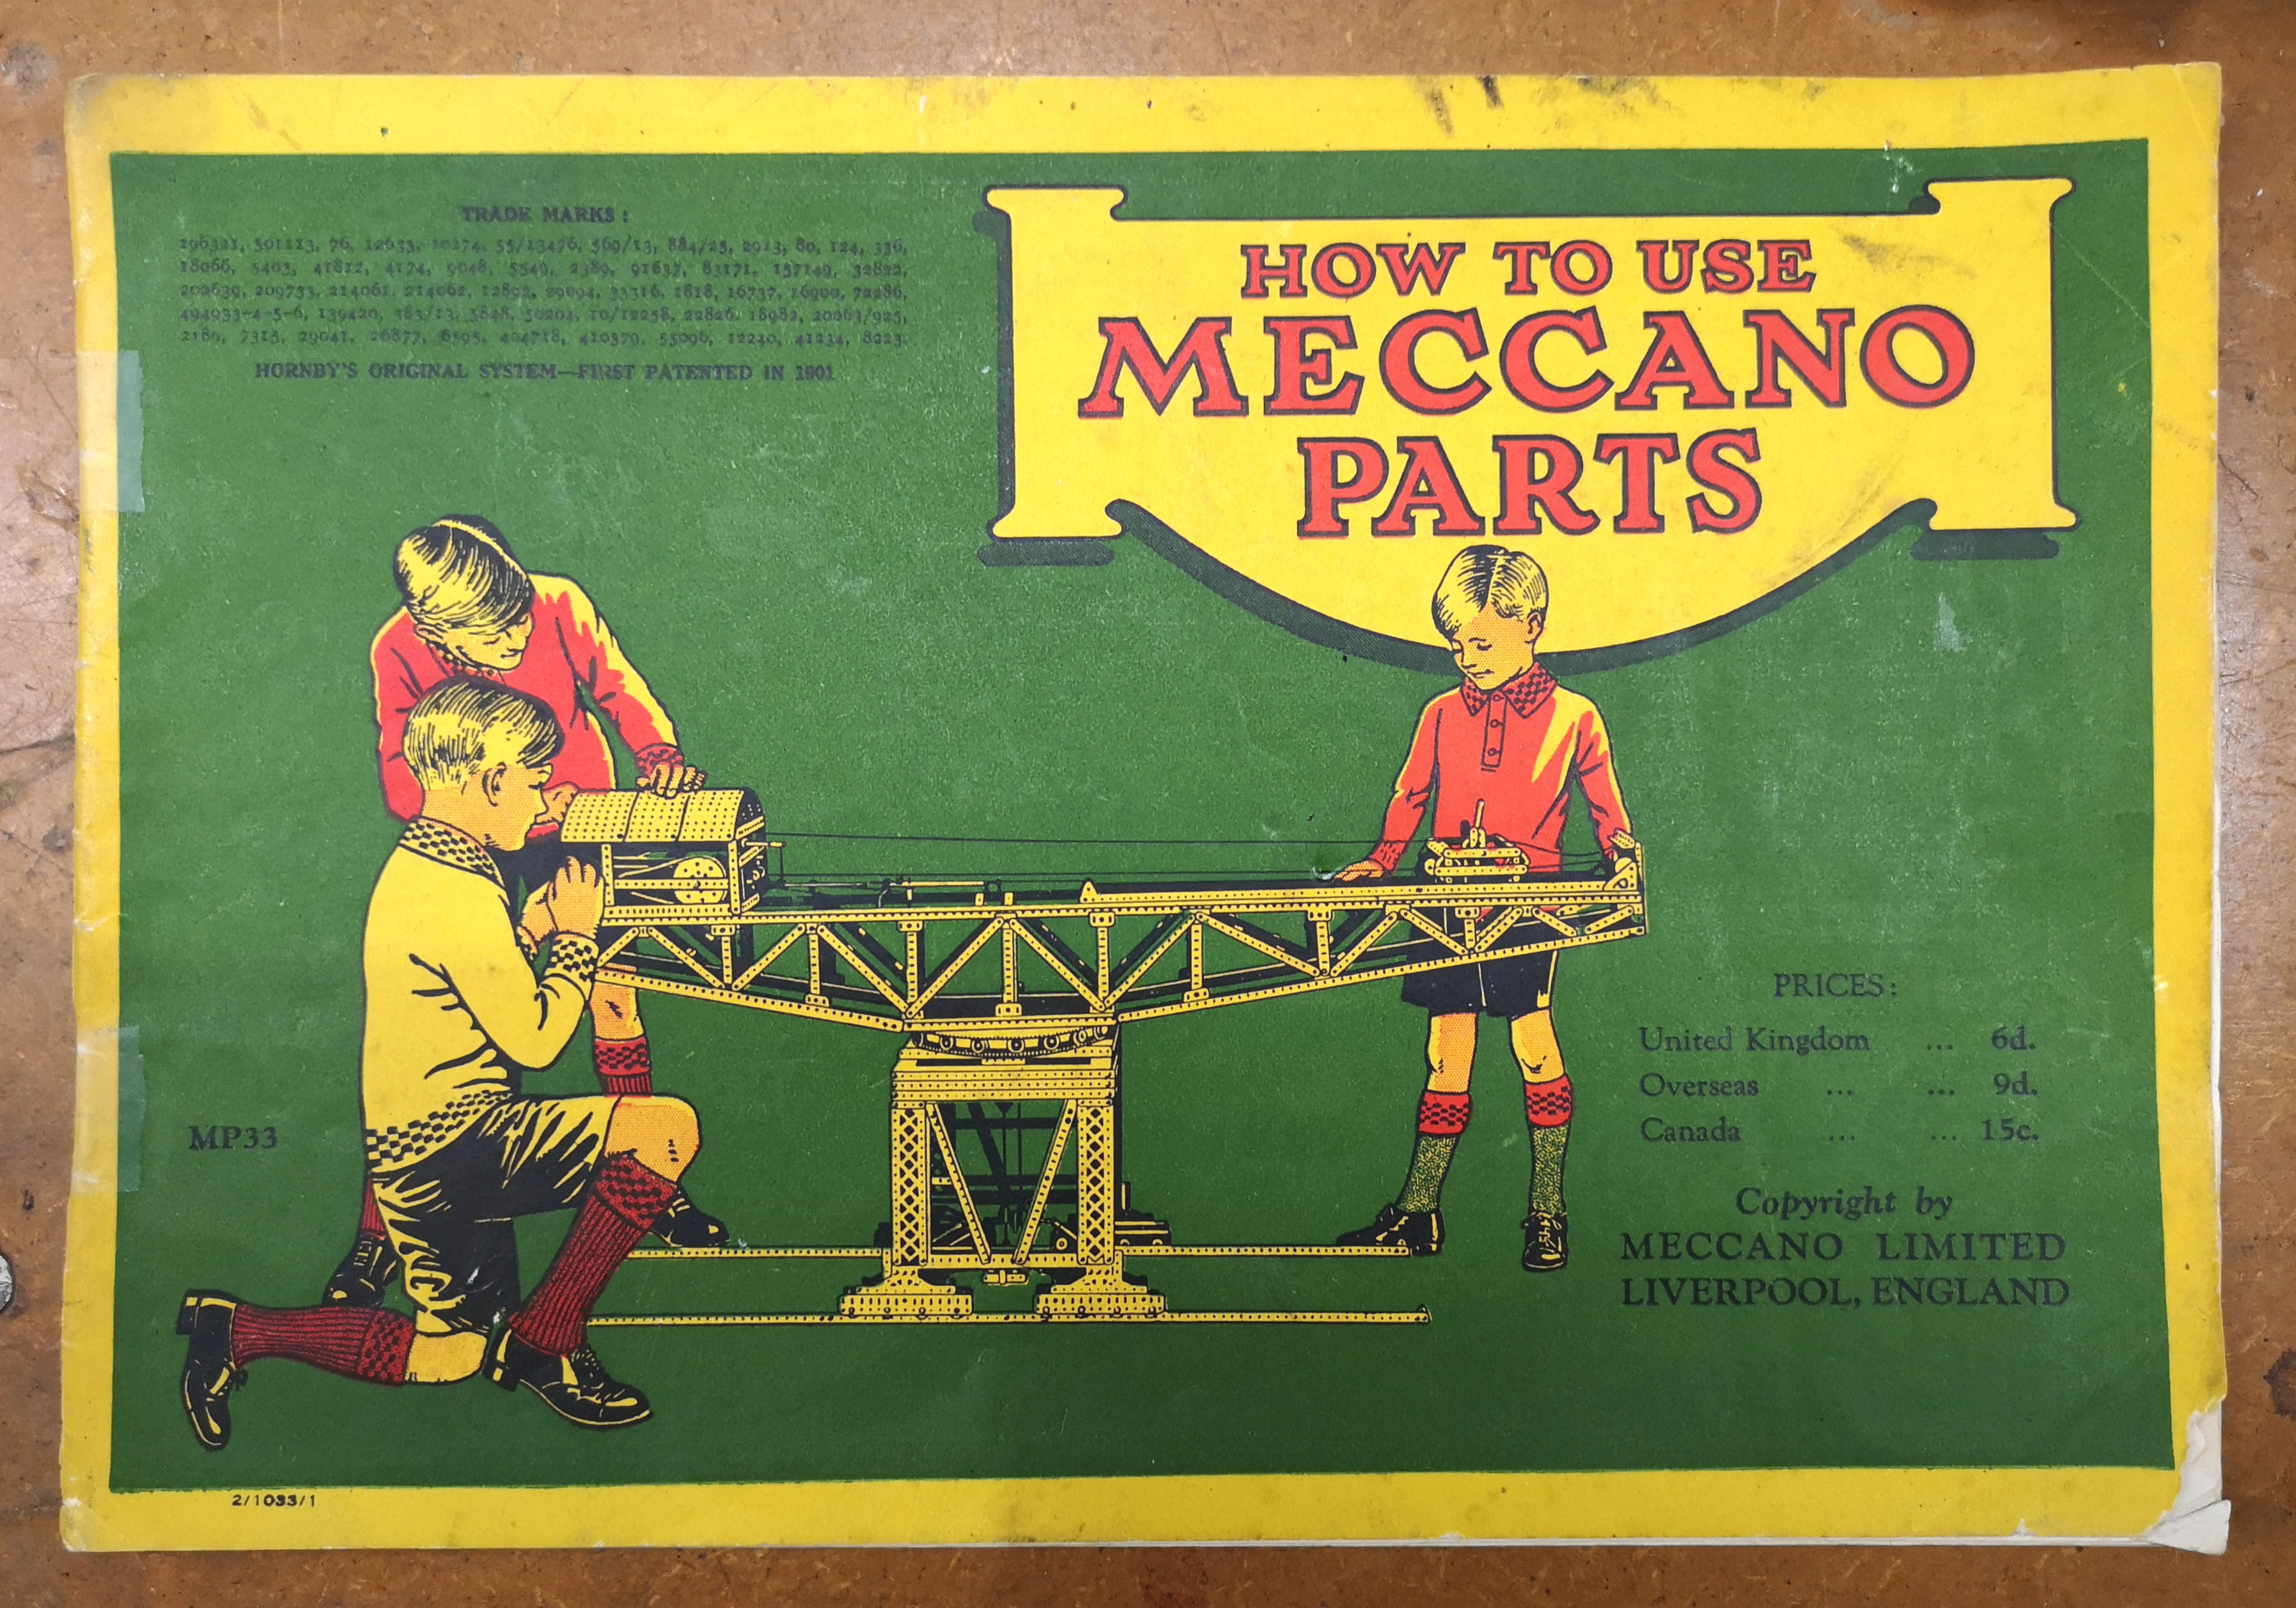 LOT 0168 - HOW TO USE MECCANO. Original 1933 booklet.